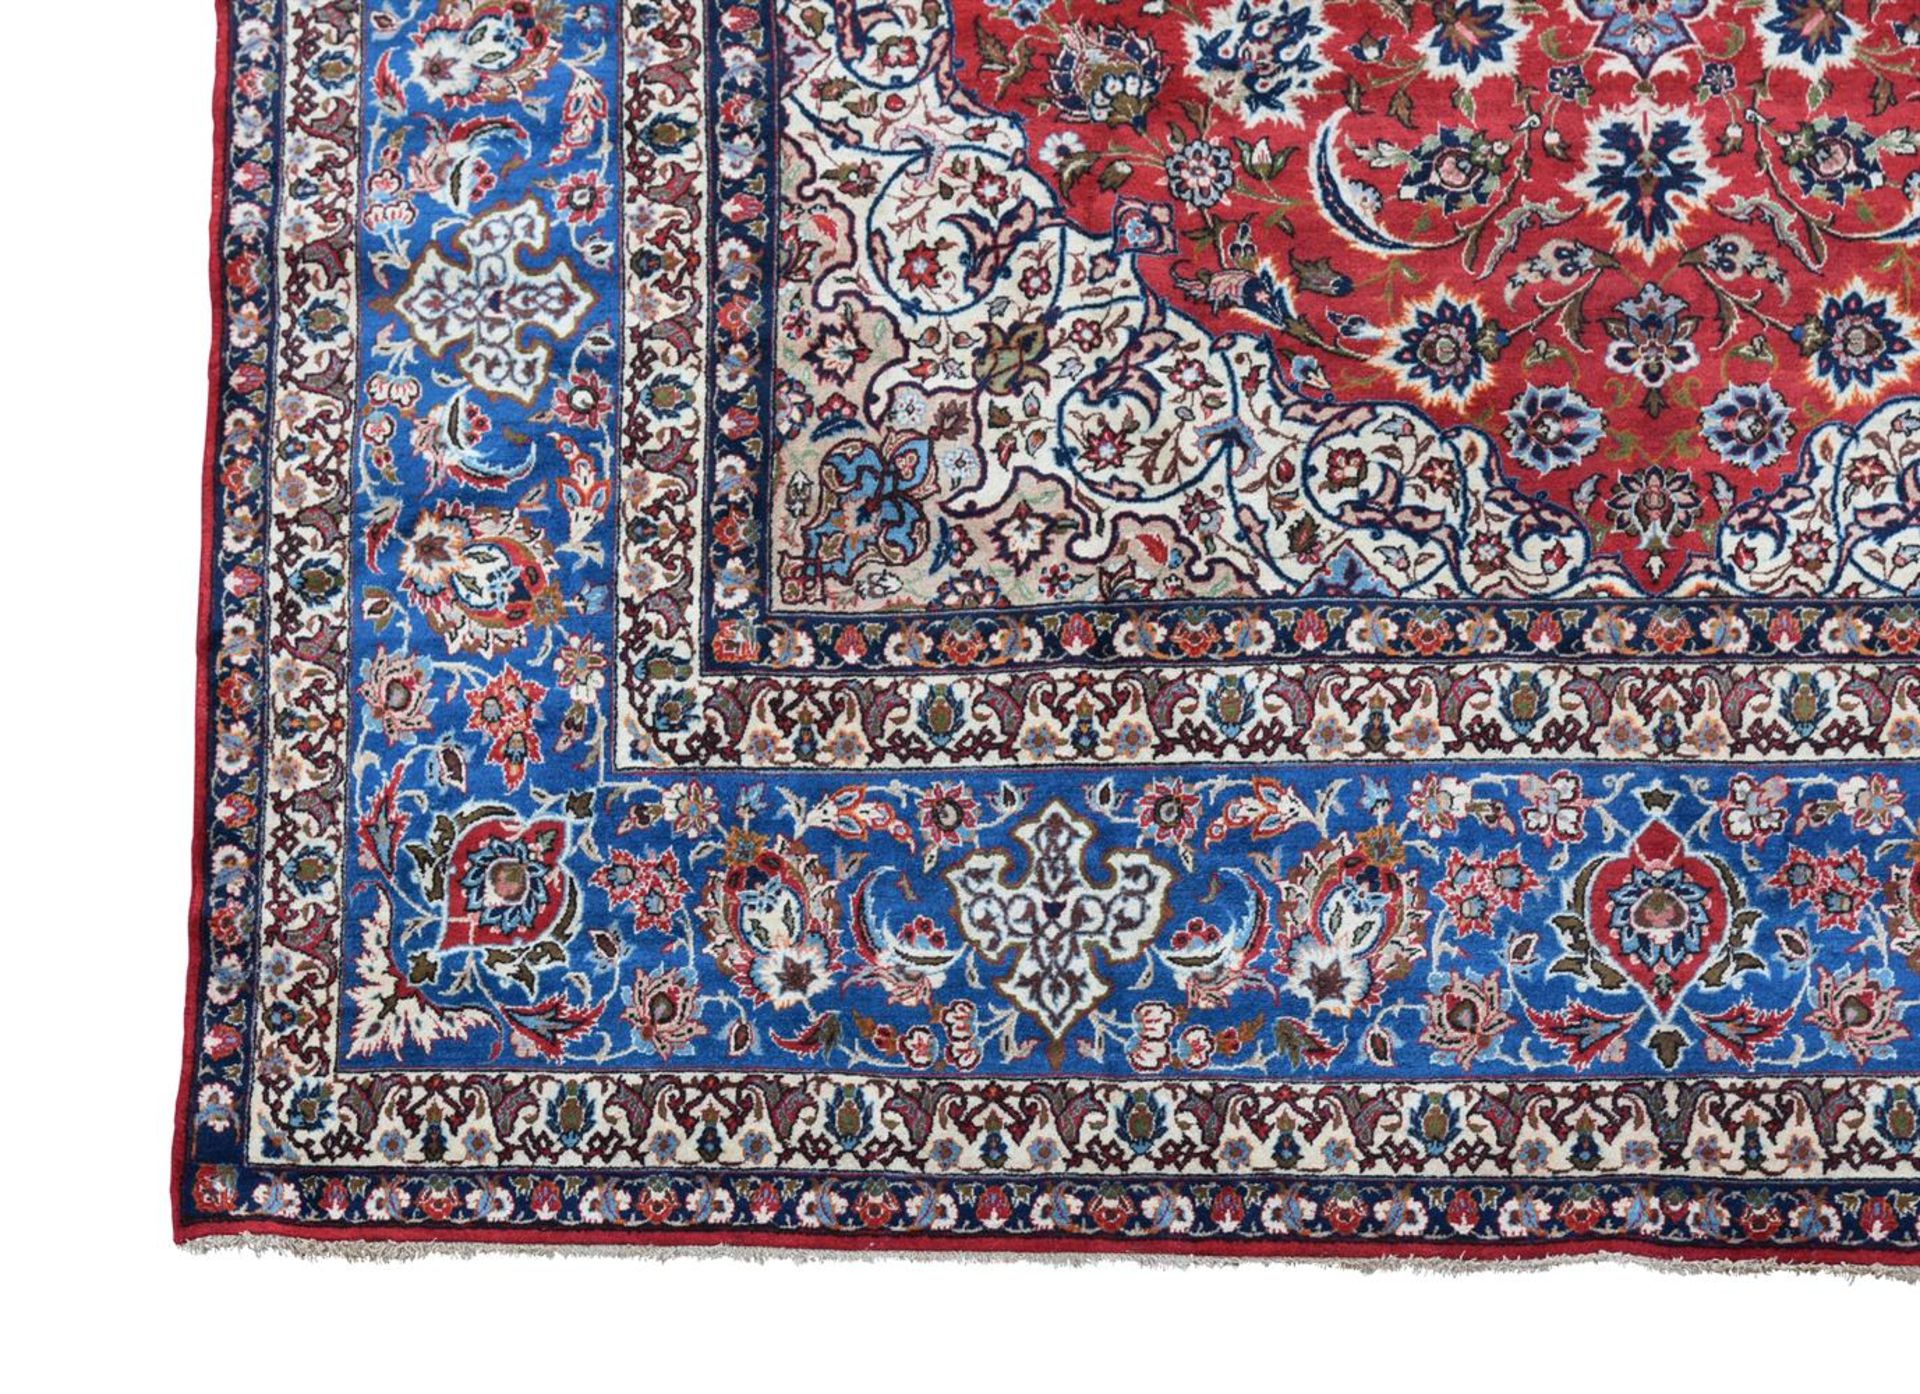 AN ISFAHAN CARPET, SIGNED AMINI, approximately 492 x 322cm - Image 2 of 4